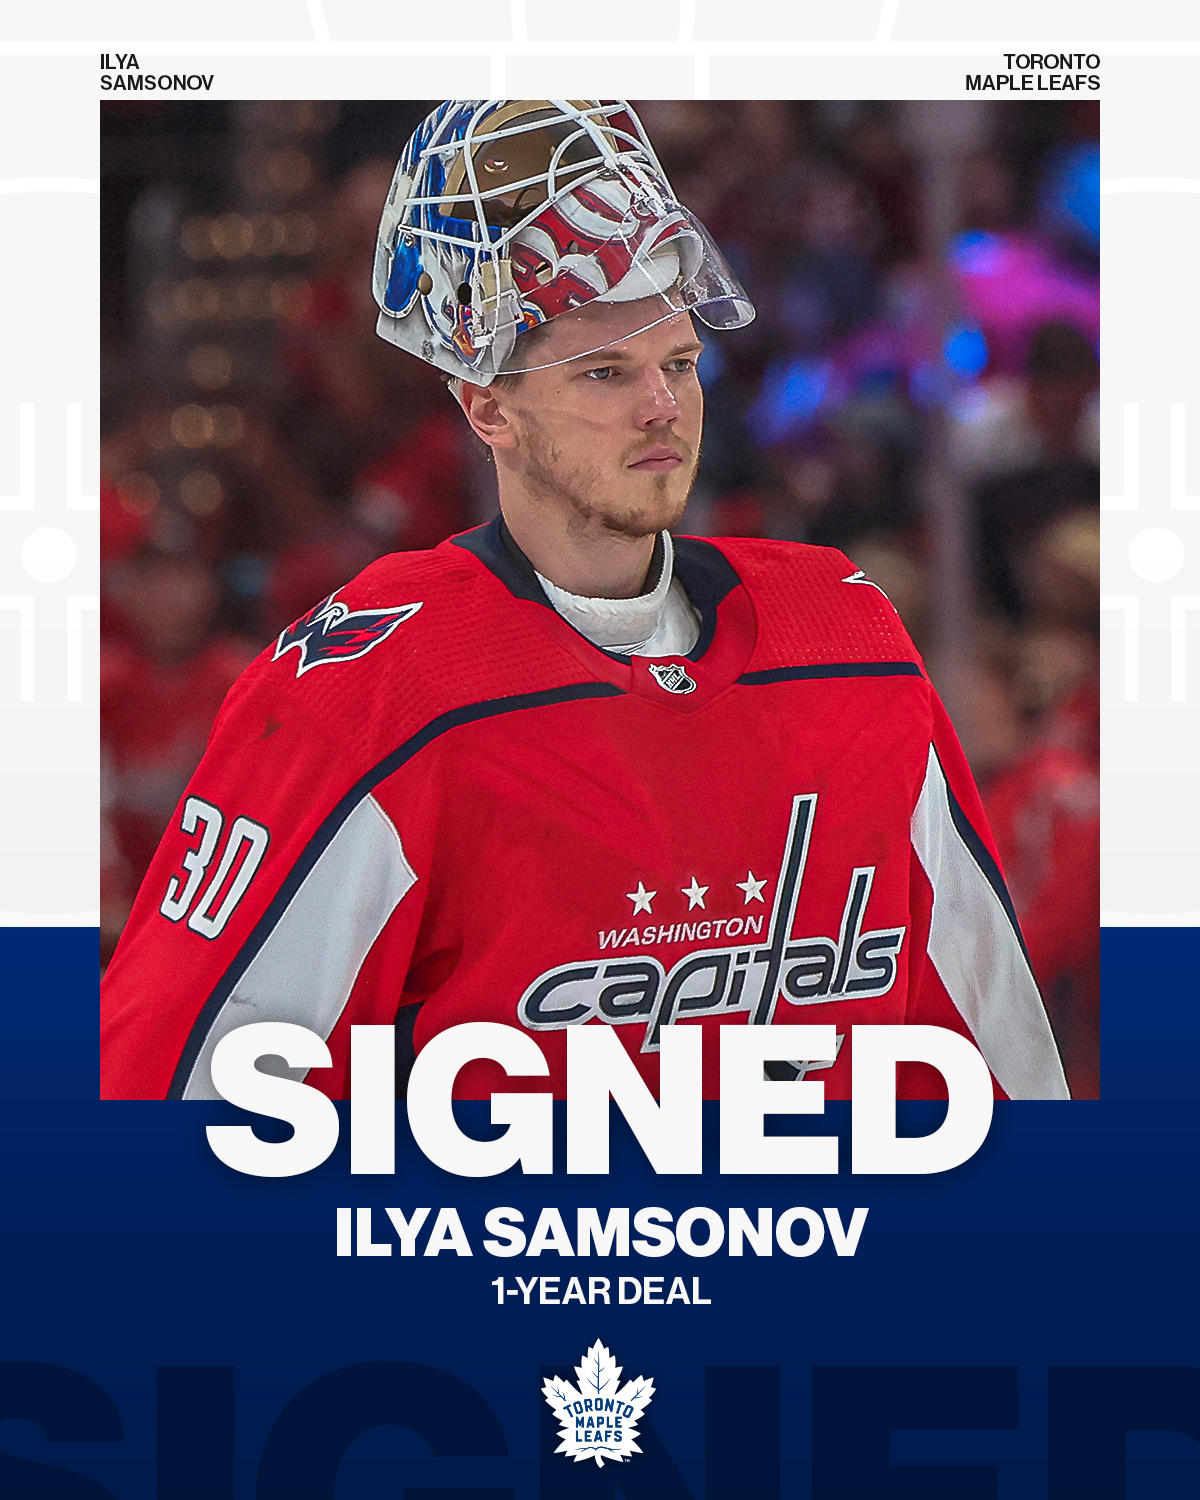 Ilya Samsonov Turned Down More Years with Another Club to Bet on Himself  With the Maple Leafs - The Hockey News Toronto Maple Leafs News, Analysis  and More